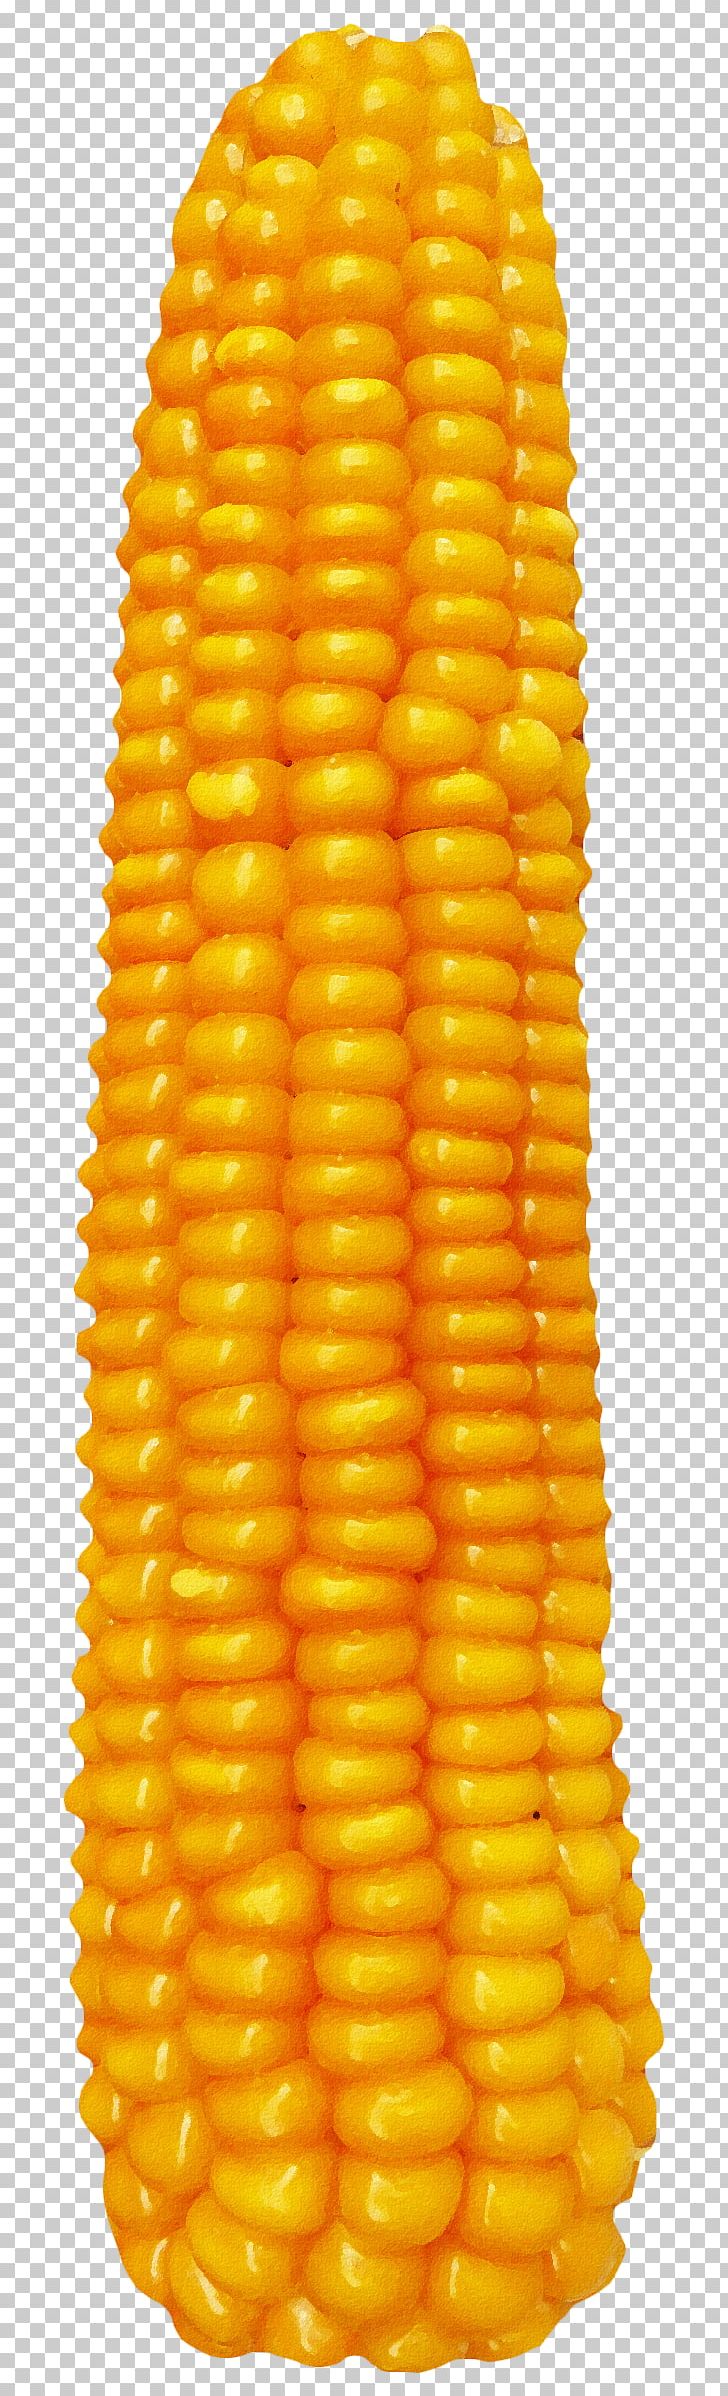 Corn On The Cob Flint Corn Food Variety PNG, Clipart, Caryopsis, Cereal, Commodity, Corn, Corn Kernel Free PNG Download